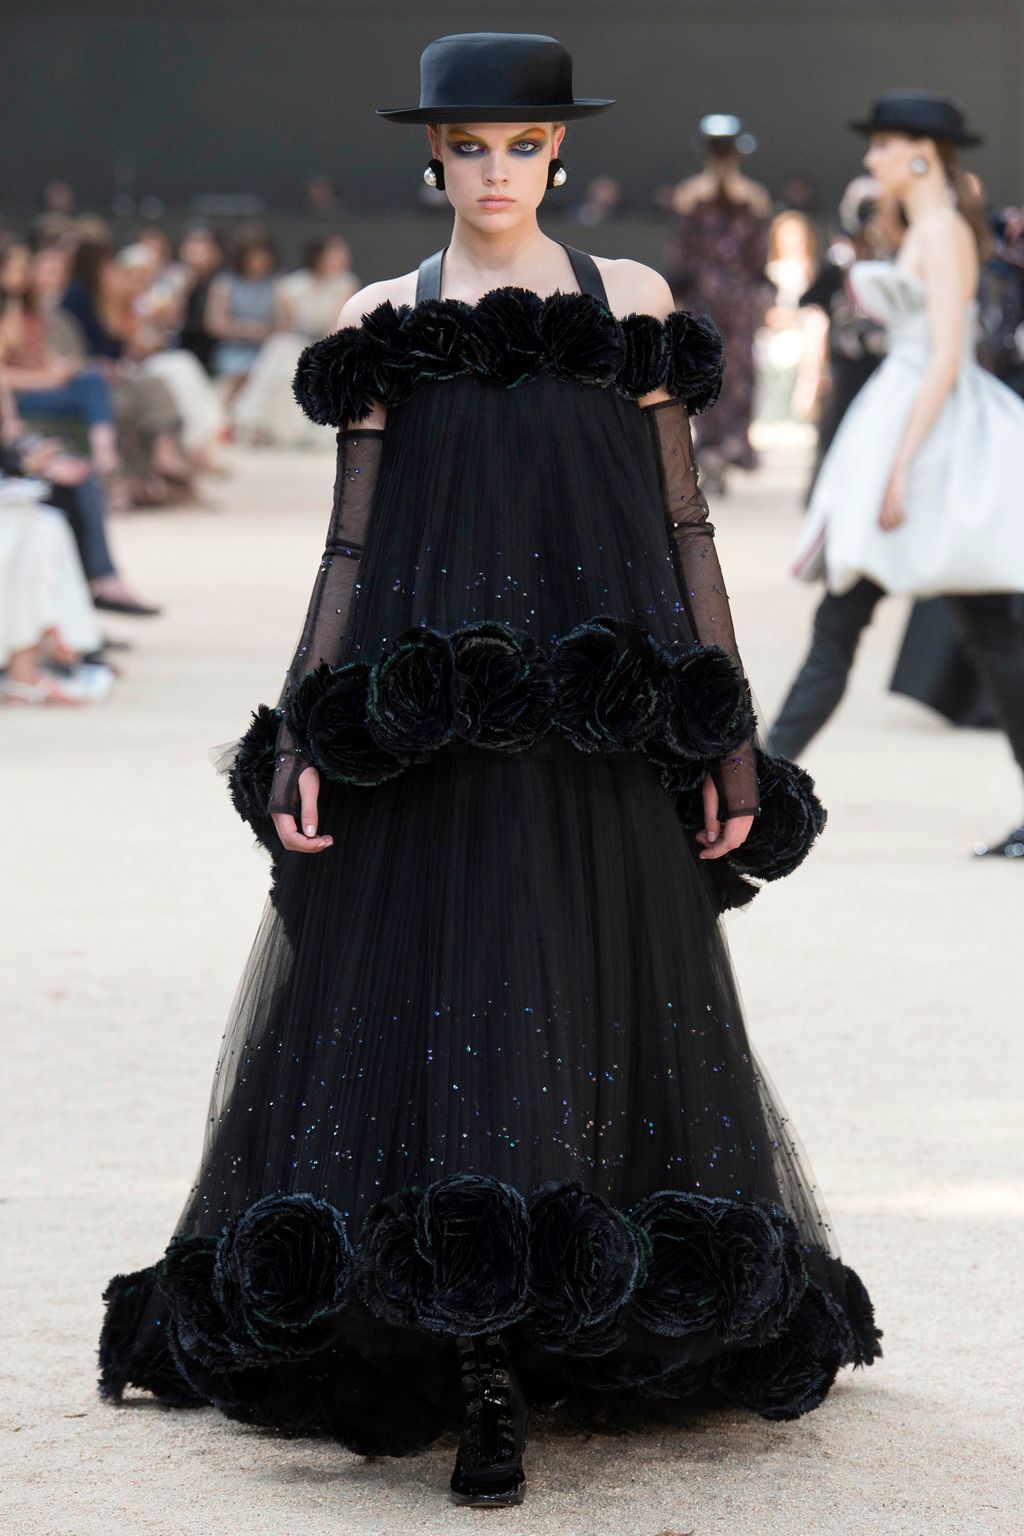 Chanel F/W 17 couture #63 - Tagwalk: The Fashion Search Engine